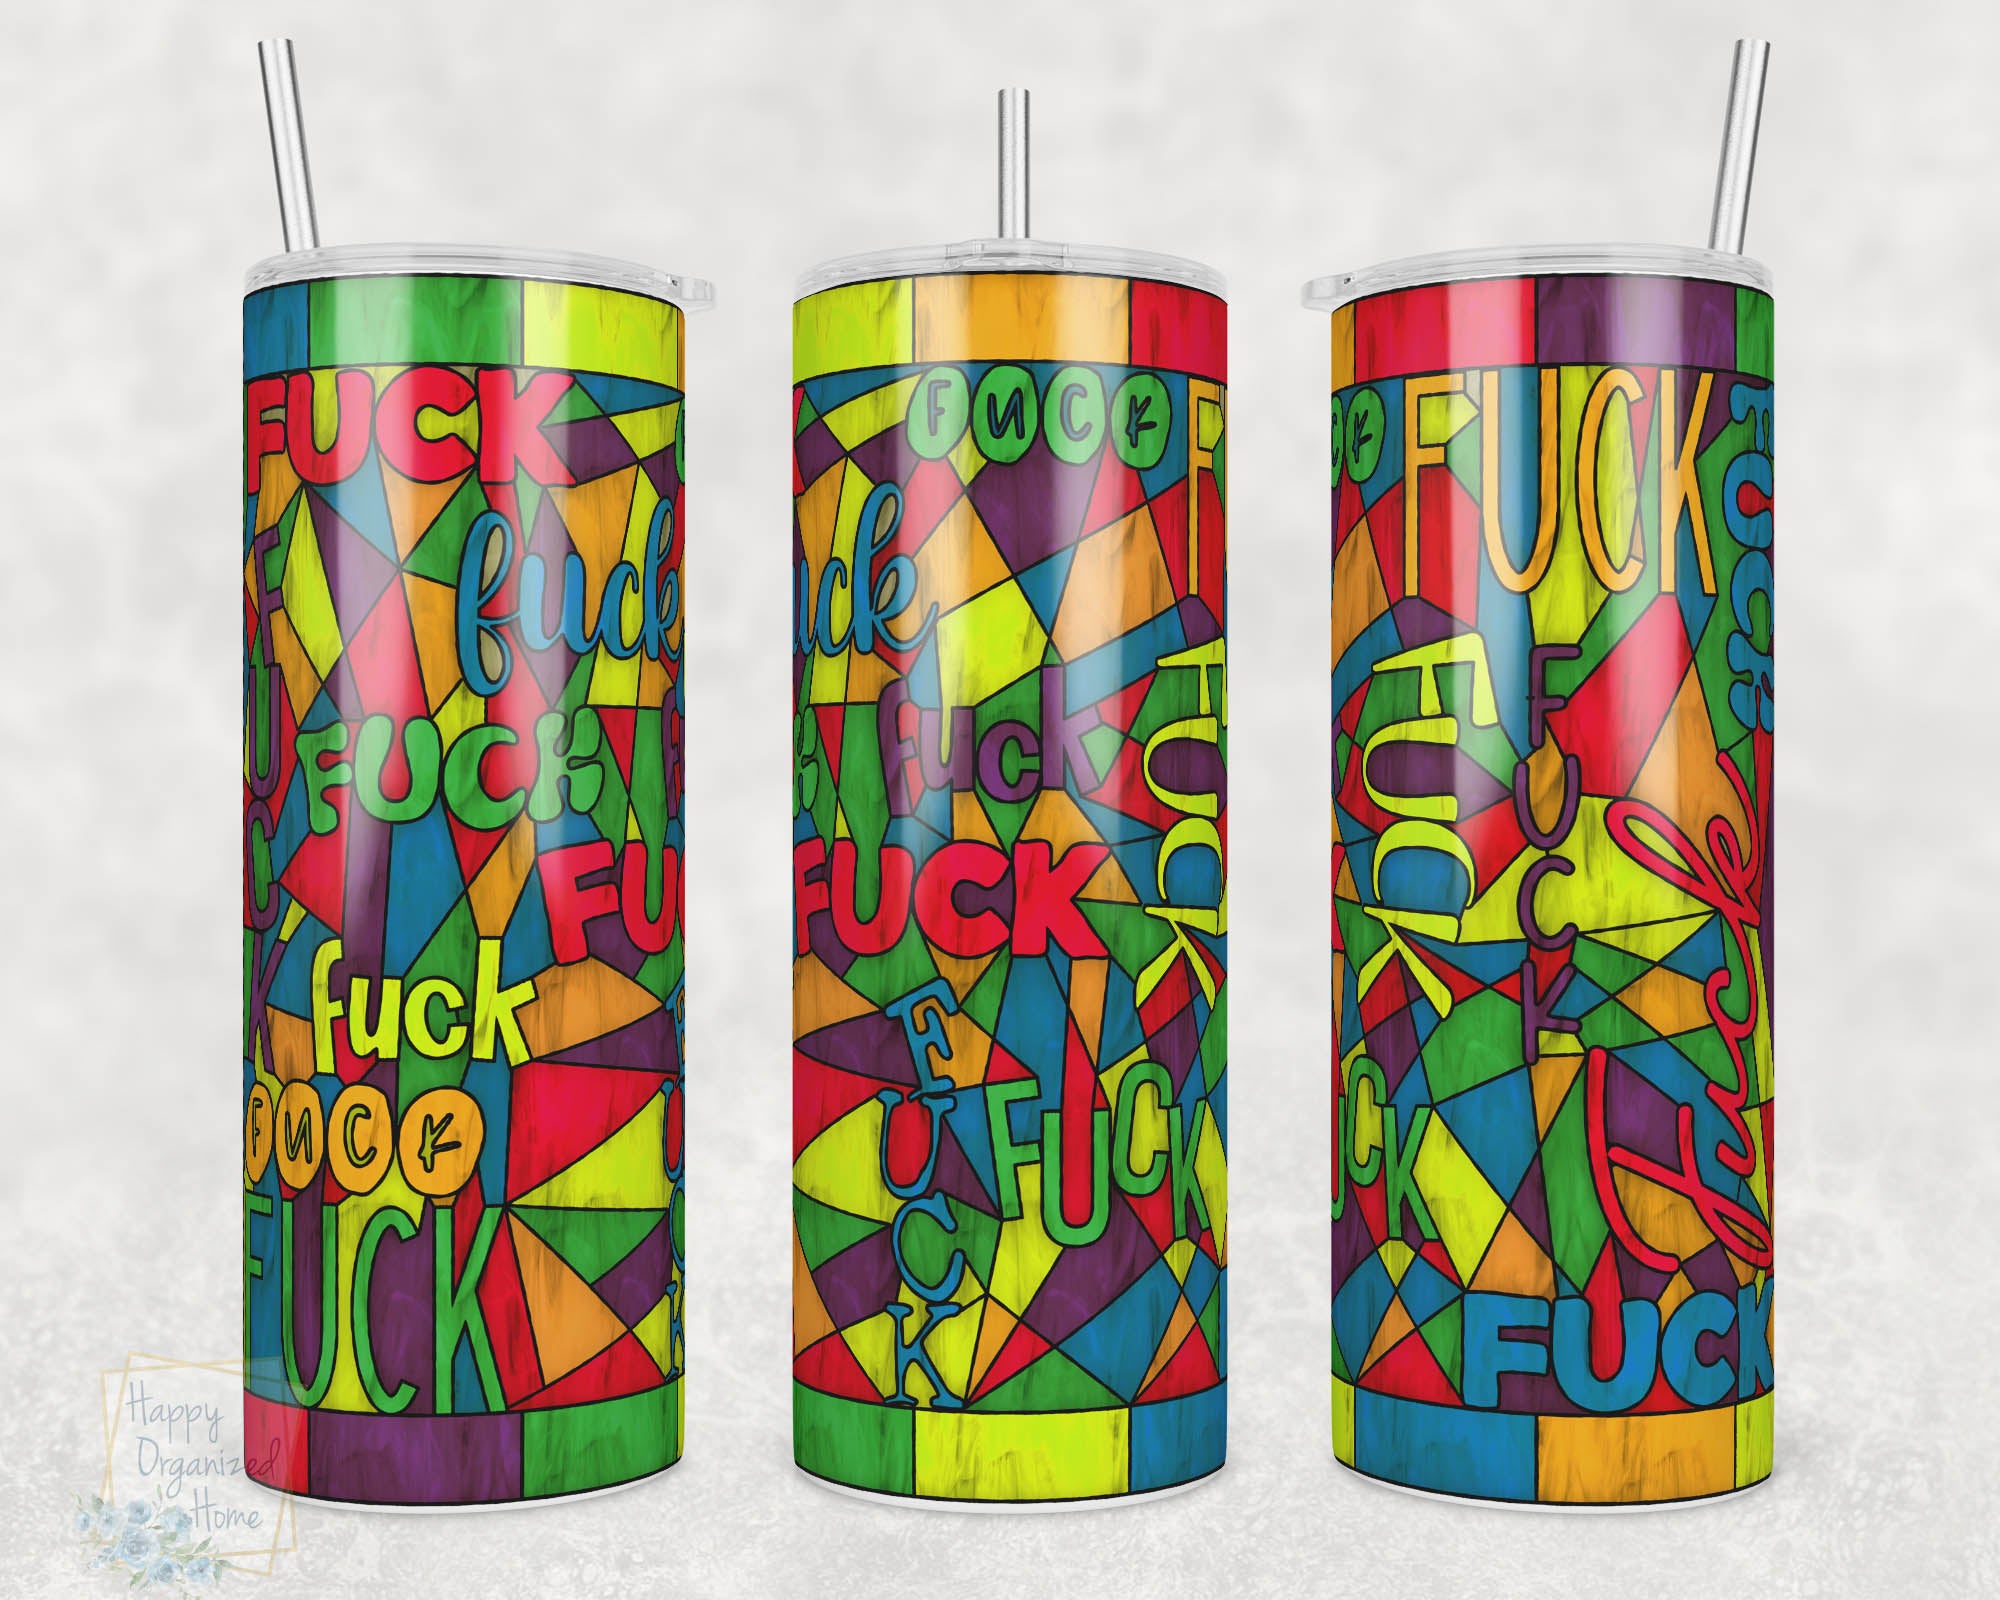 Fuck Fuck Fuck Stained glass look -  20oz Skinny Insulated tumbler with metal straw